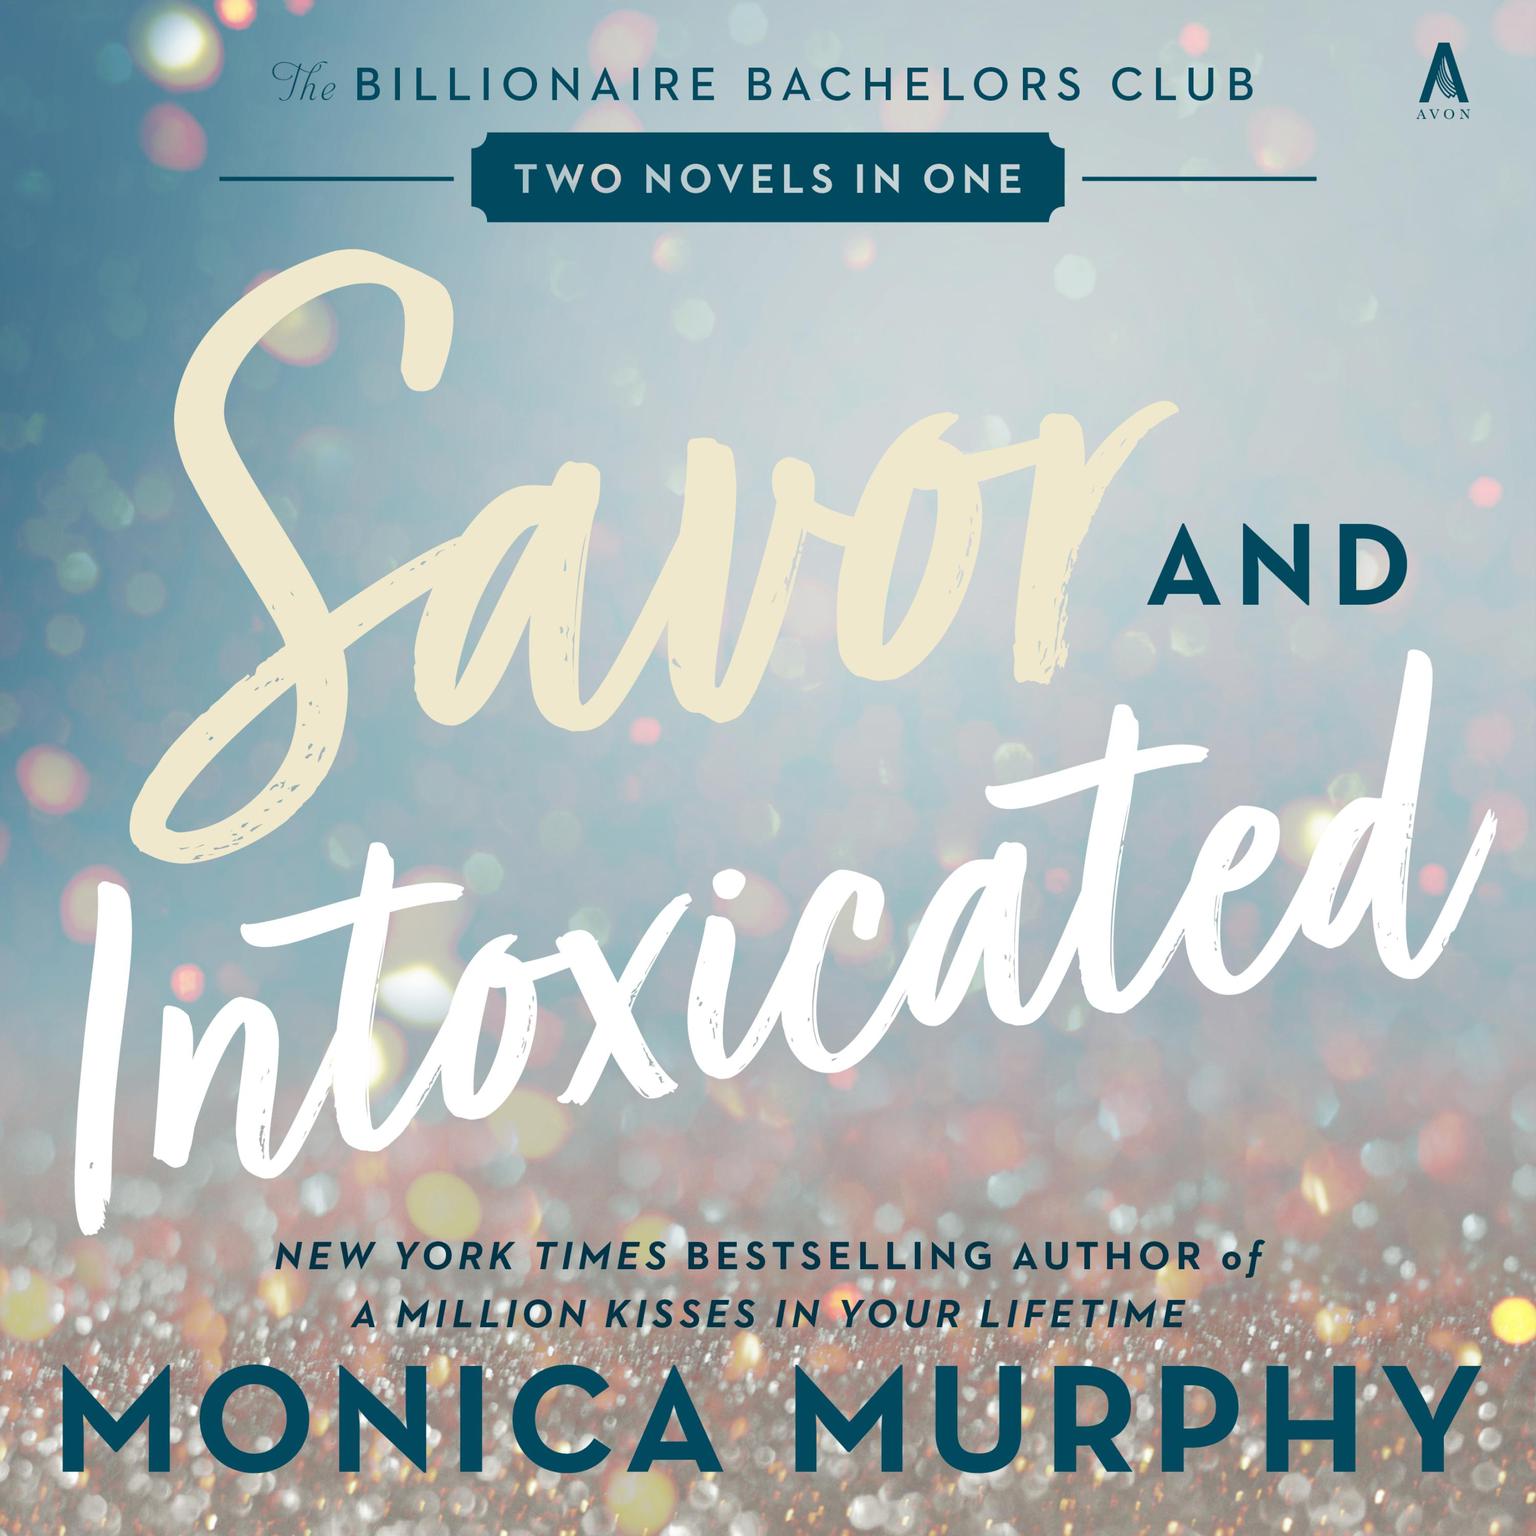 Savor and Intoxicated: The Billionaire Bachelors Club Audiobook, by Monica Murphy